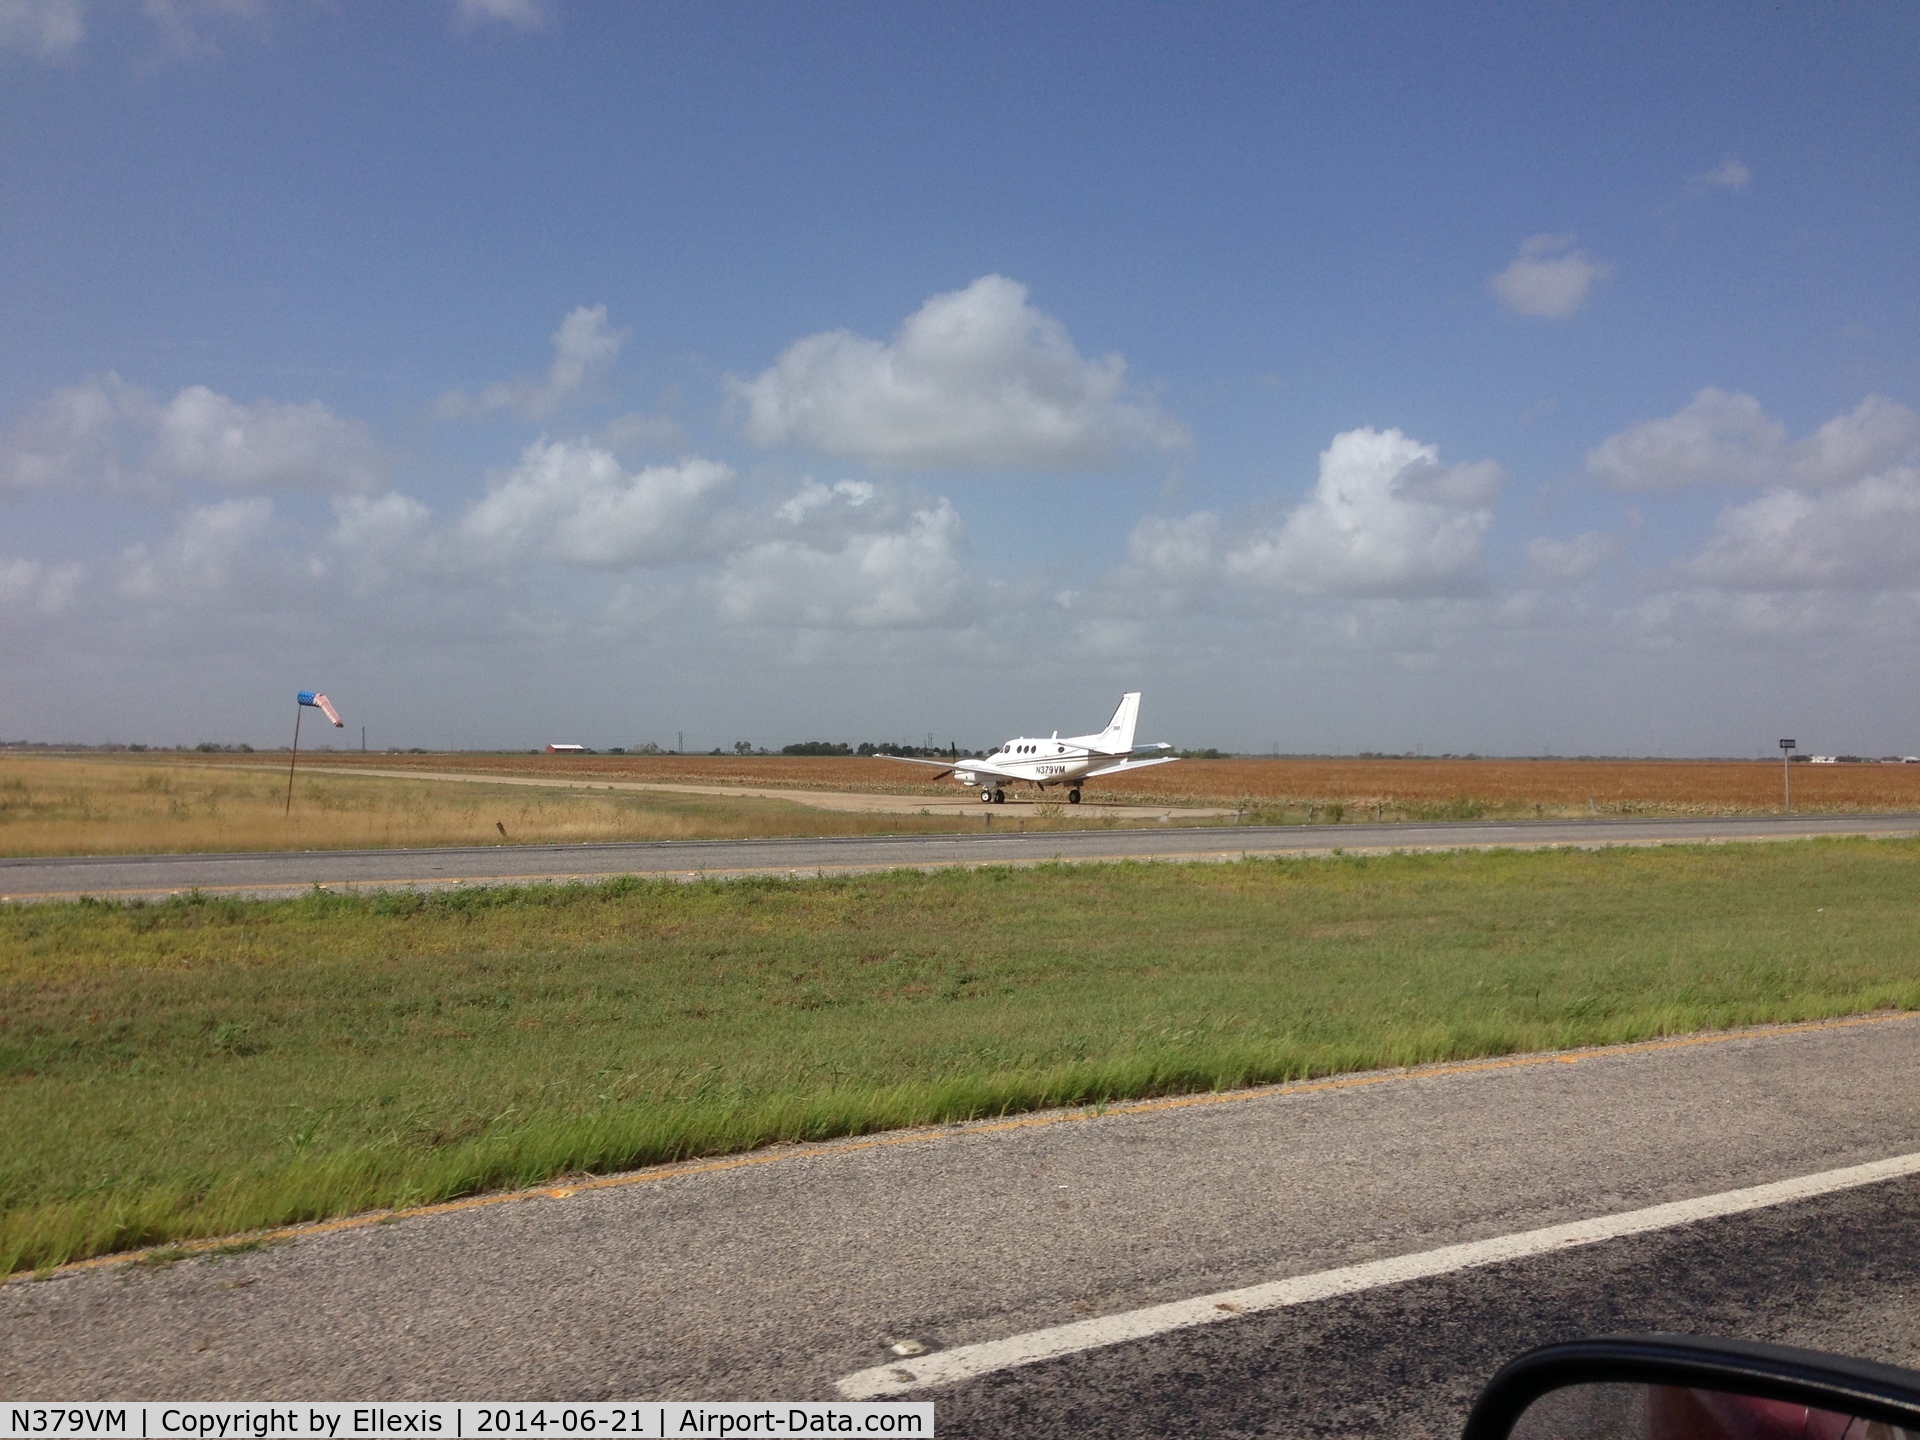 N379VM, 1972 Beech E-90 King Air C/N LW-27, While driving to Laredo on TX-44 near Robstown, TX, N379VM lined up on a dirt runway for takeoff.